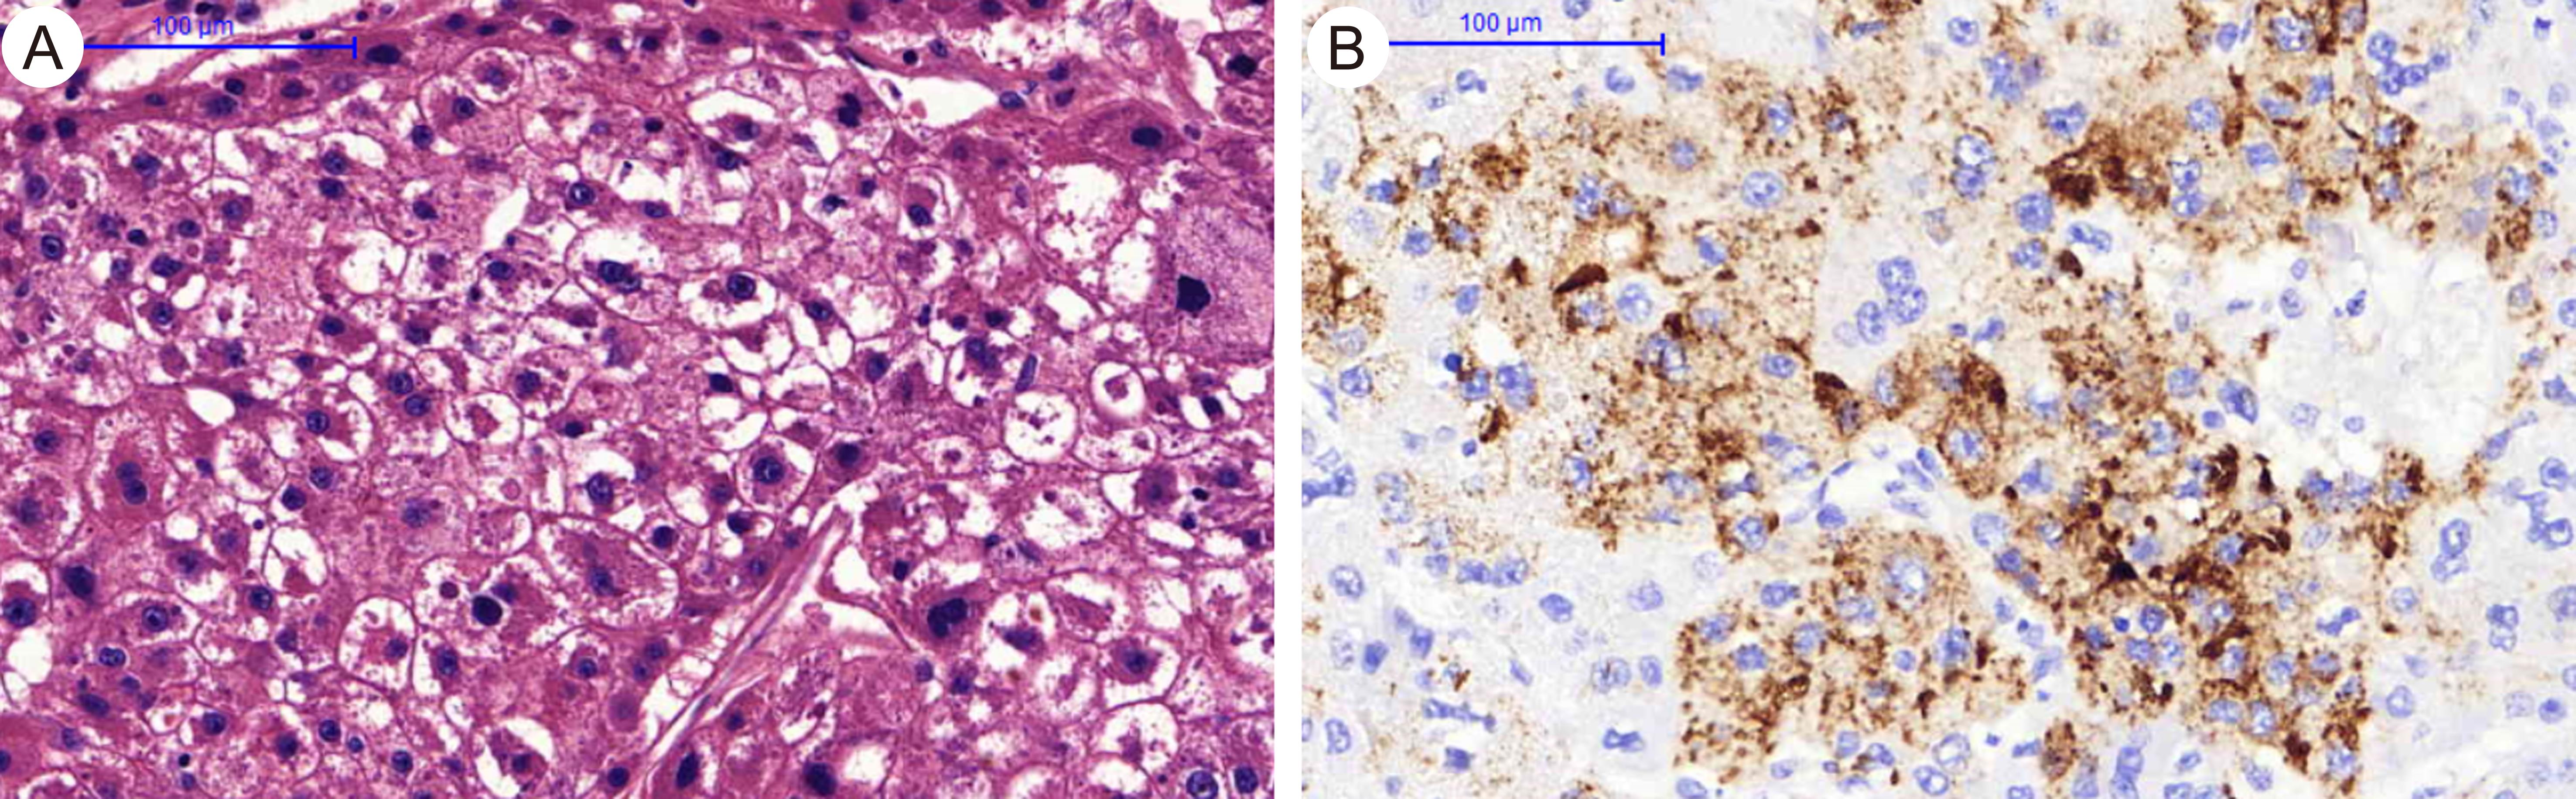 IHC studies of the liver HCC resected in 2009.